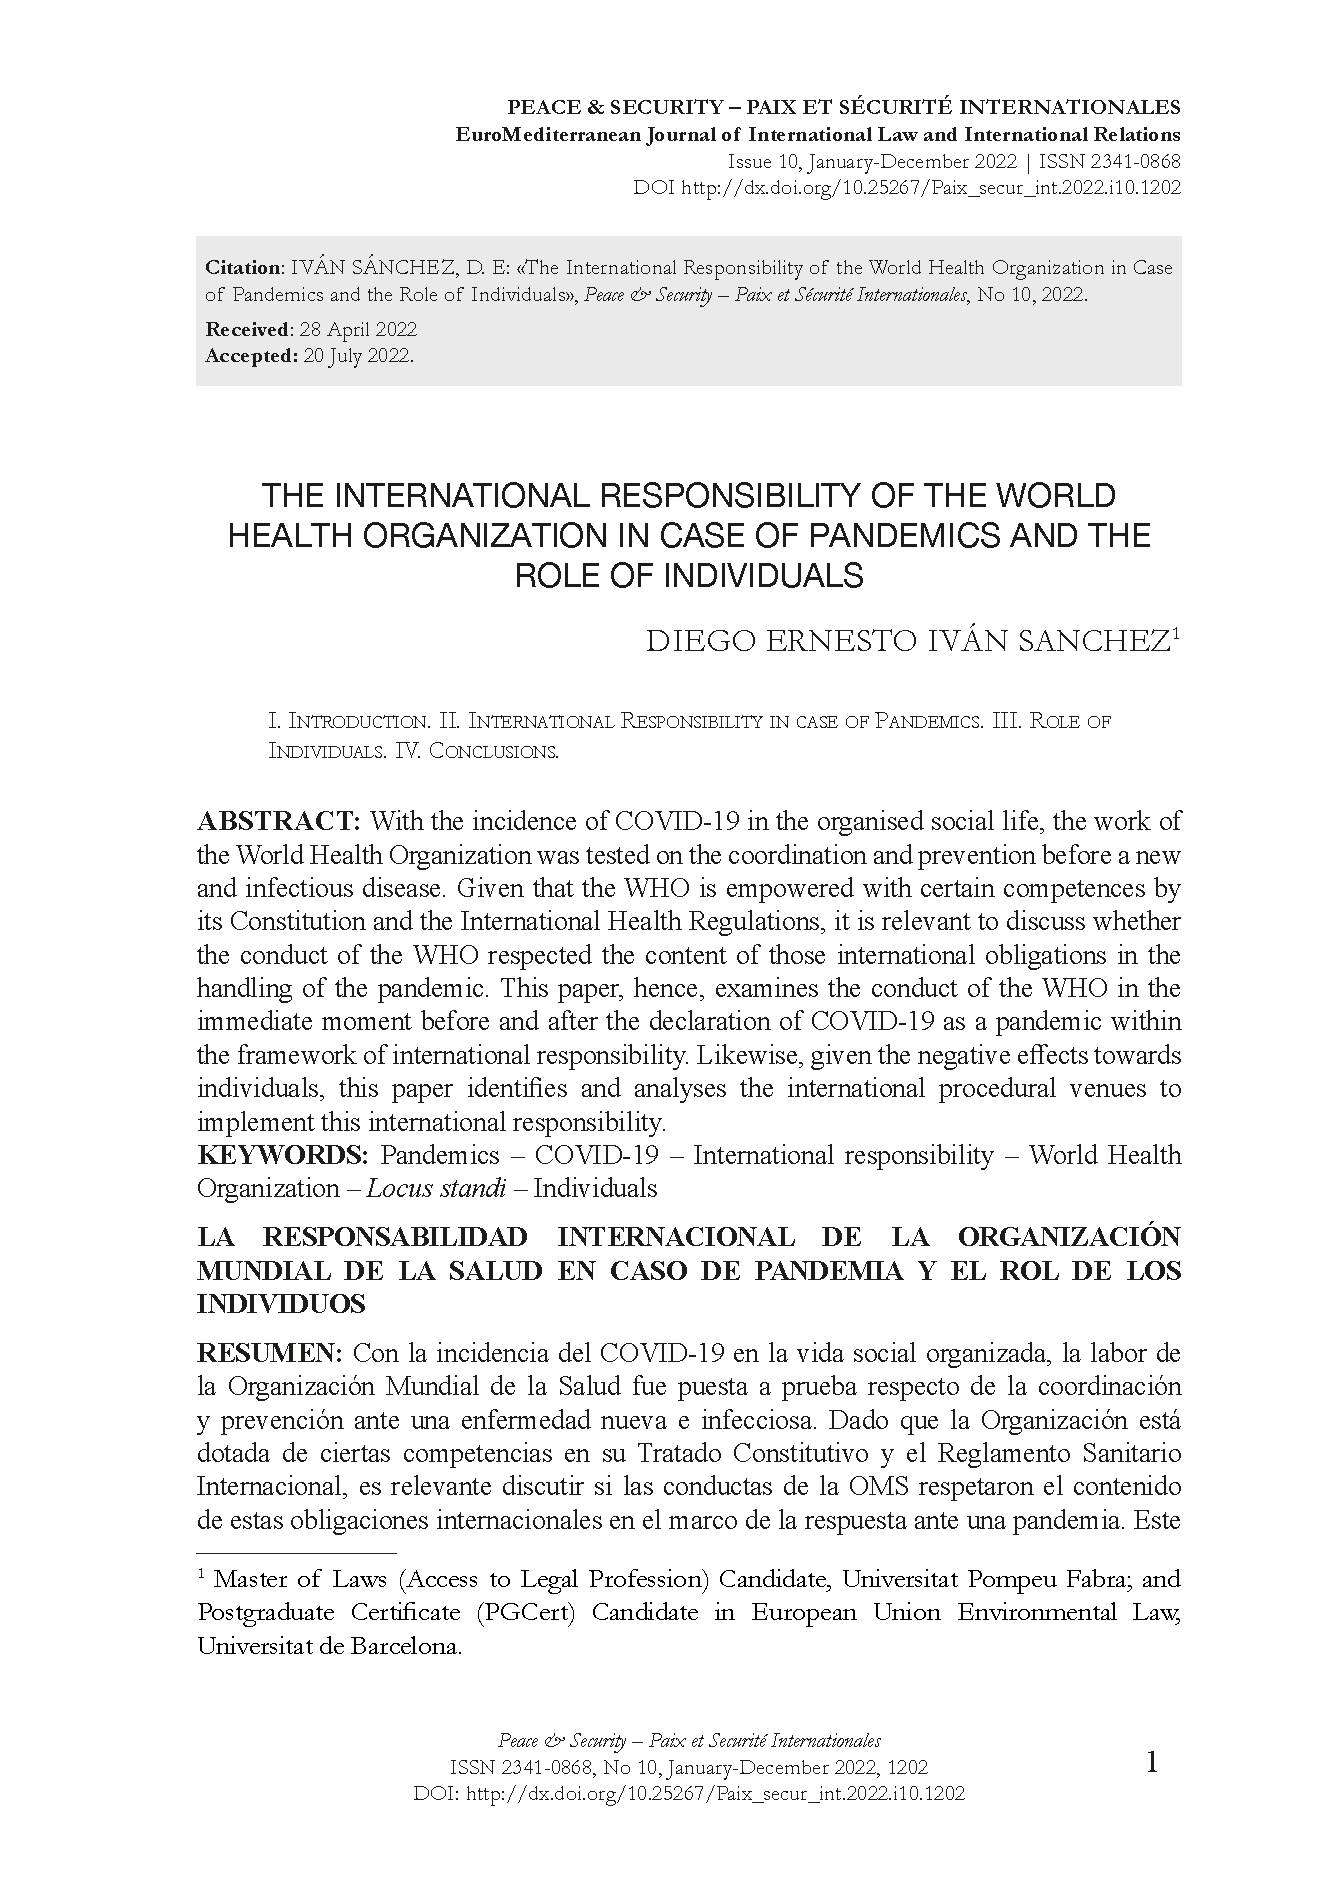 The International Responsibility of the World Health Organization in Case of Pandemics and the Role of Individual